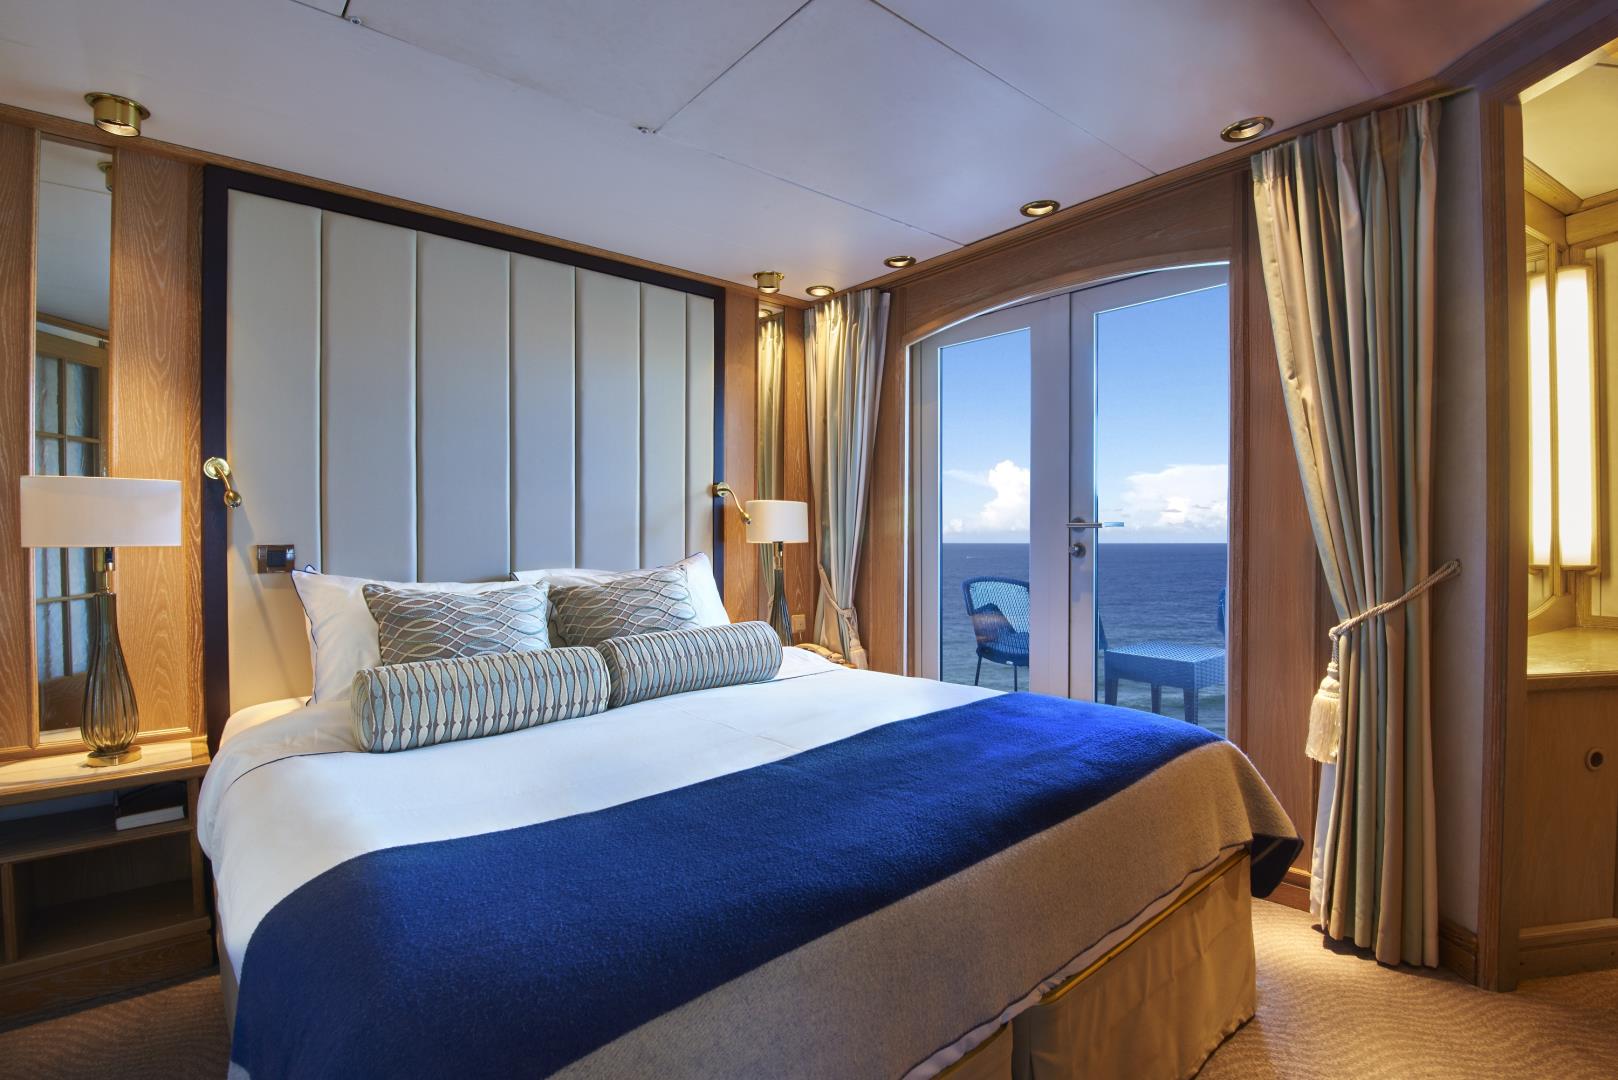 View of bed and balcony in Star Pride suite - Photo Credit: Gil Stose Photography